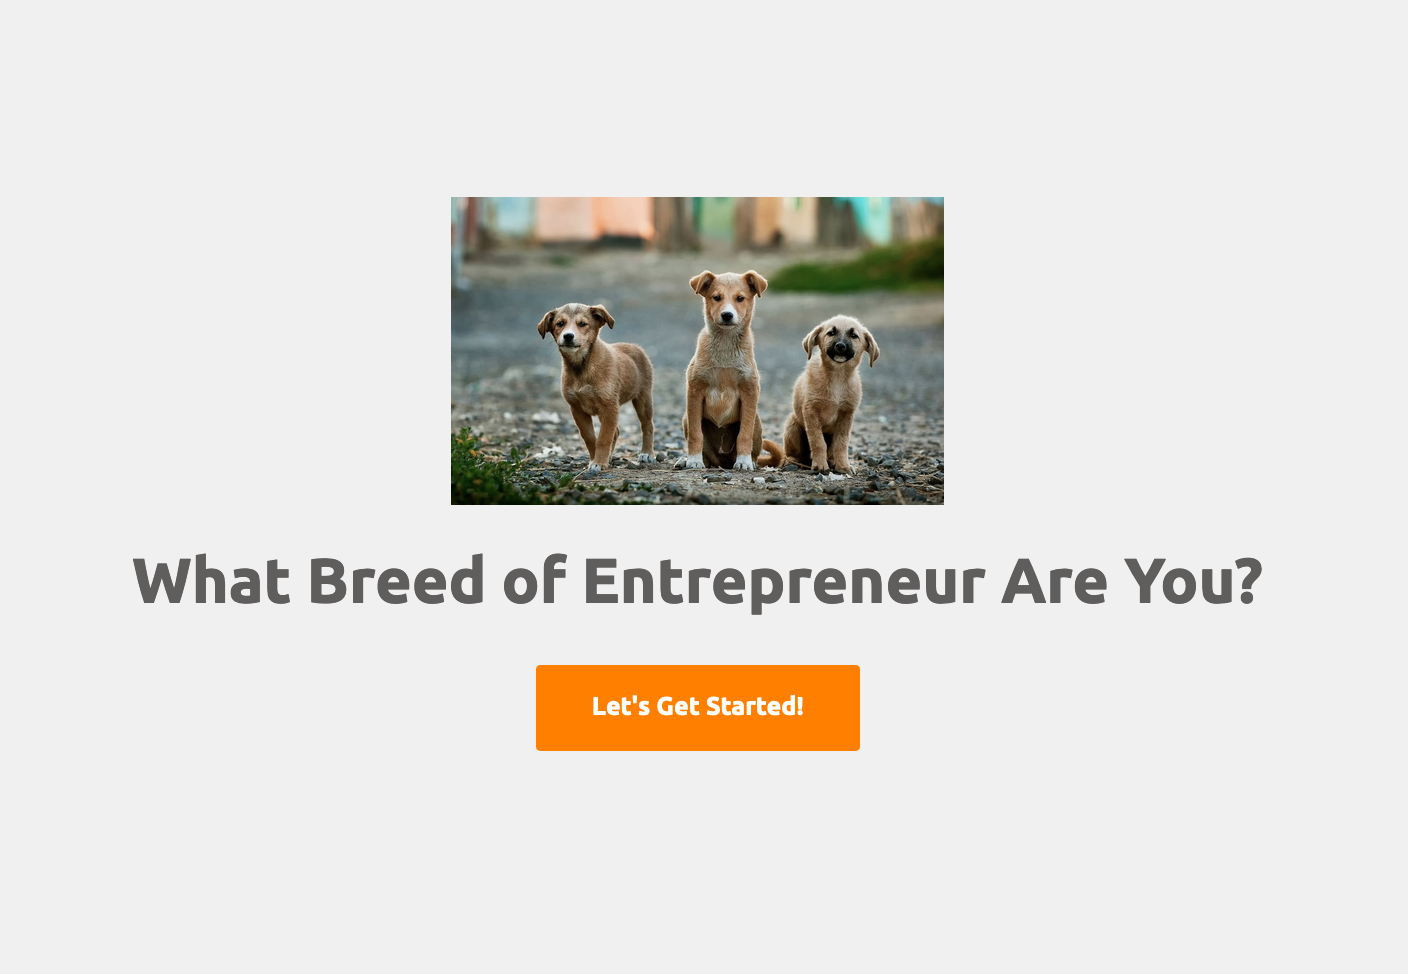 "What Breed of Entrepreneur Are You?" Quiz